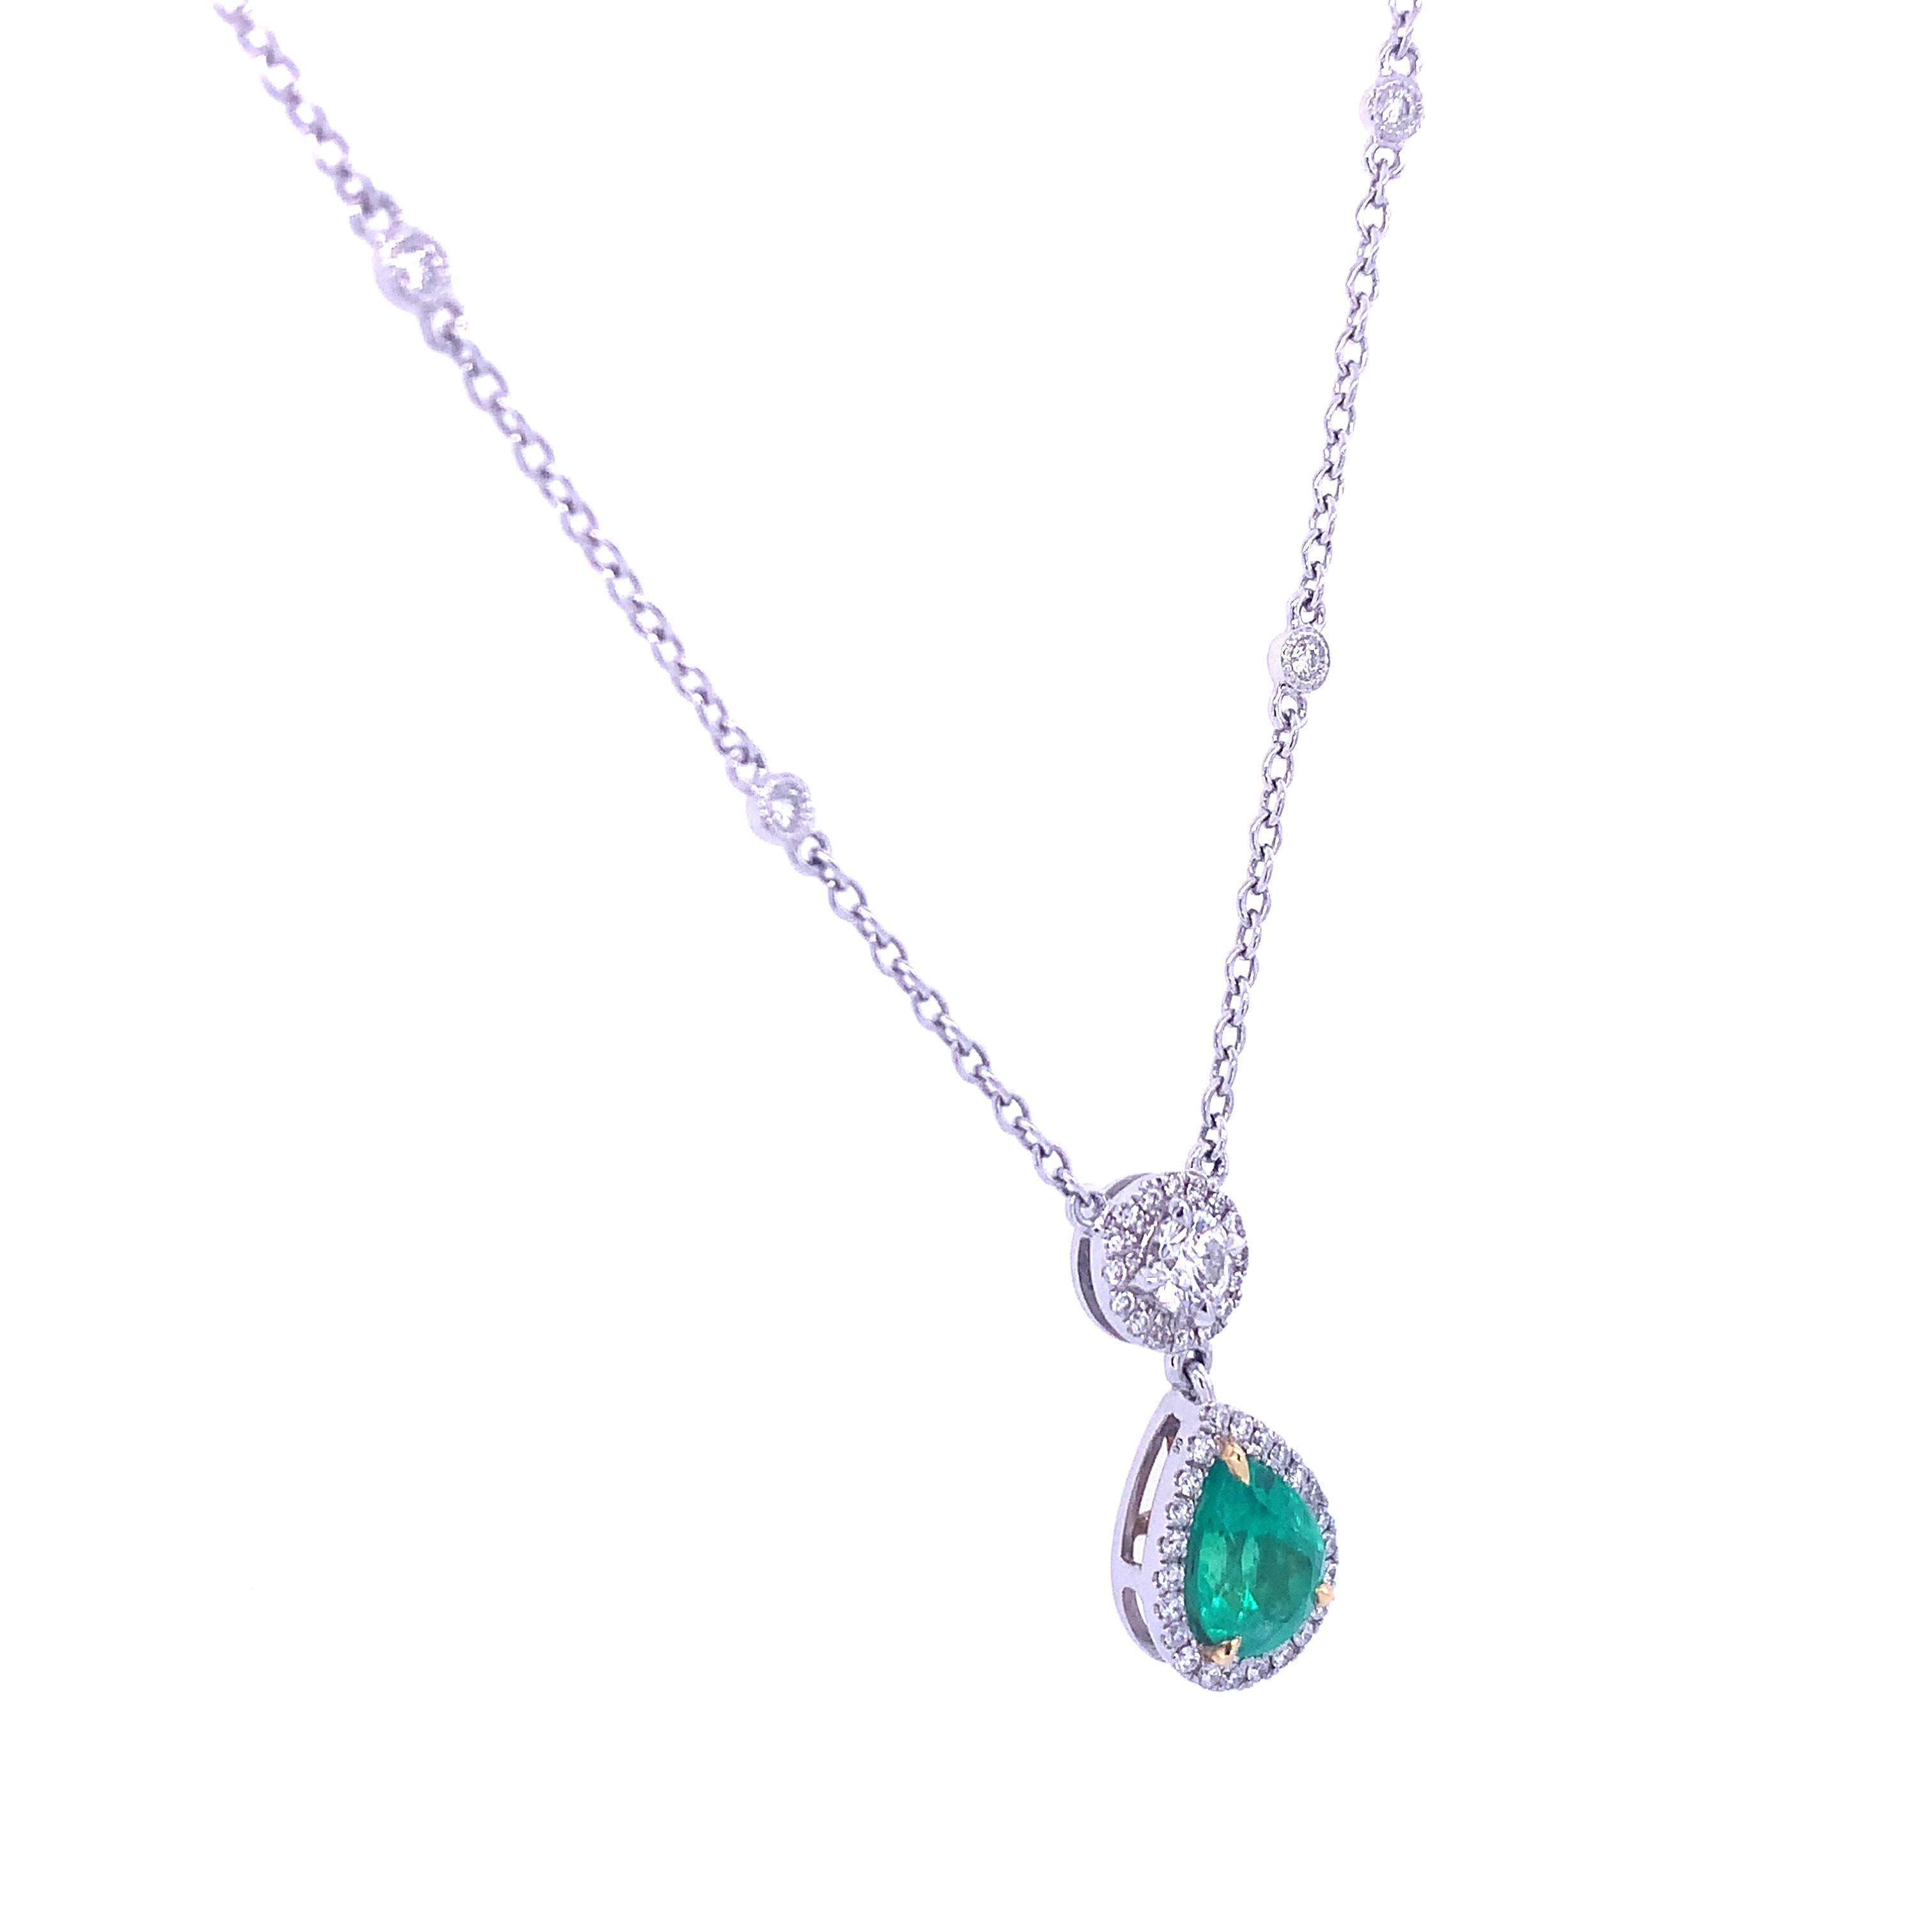 This dazzling diamond and pear-shape emerald drop pendant features a .53 carat diamond drop halo embellished with ten (10) bezel-set diamonds that lead to a 1.24 carat pear-shaped emerald complimented by pave diamonds. This stunning 18K white gold